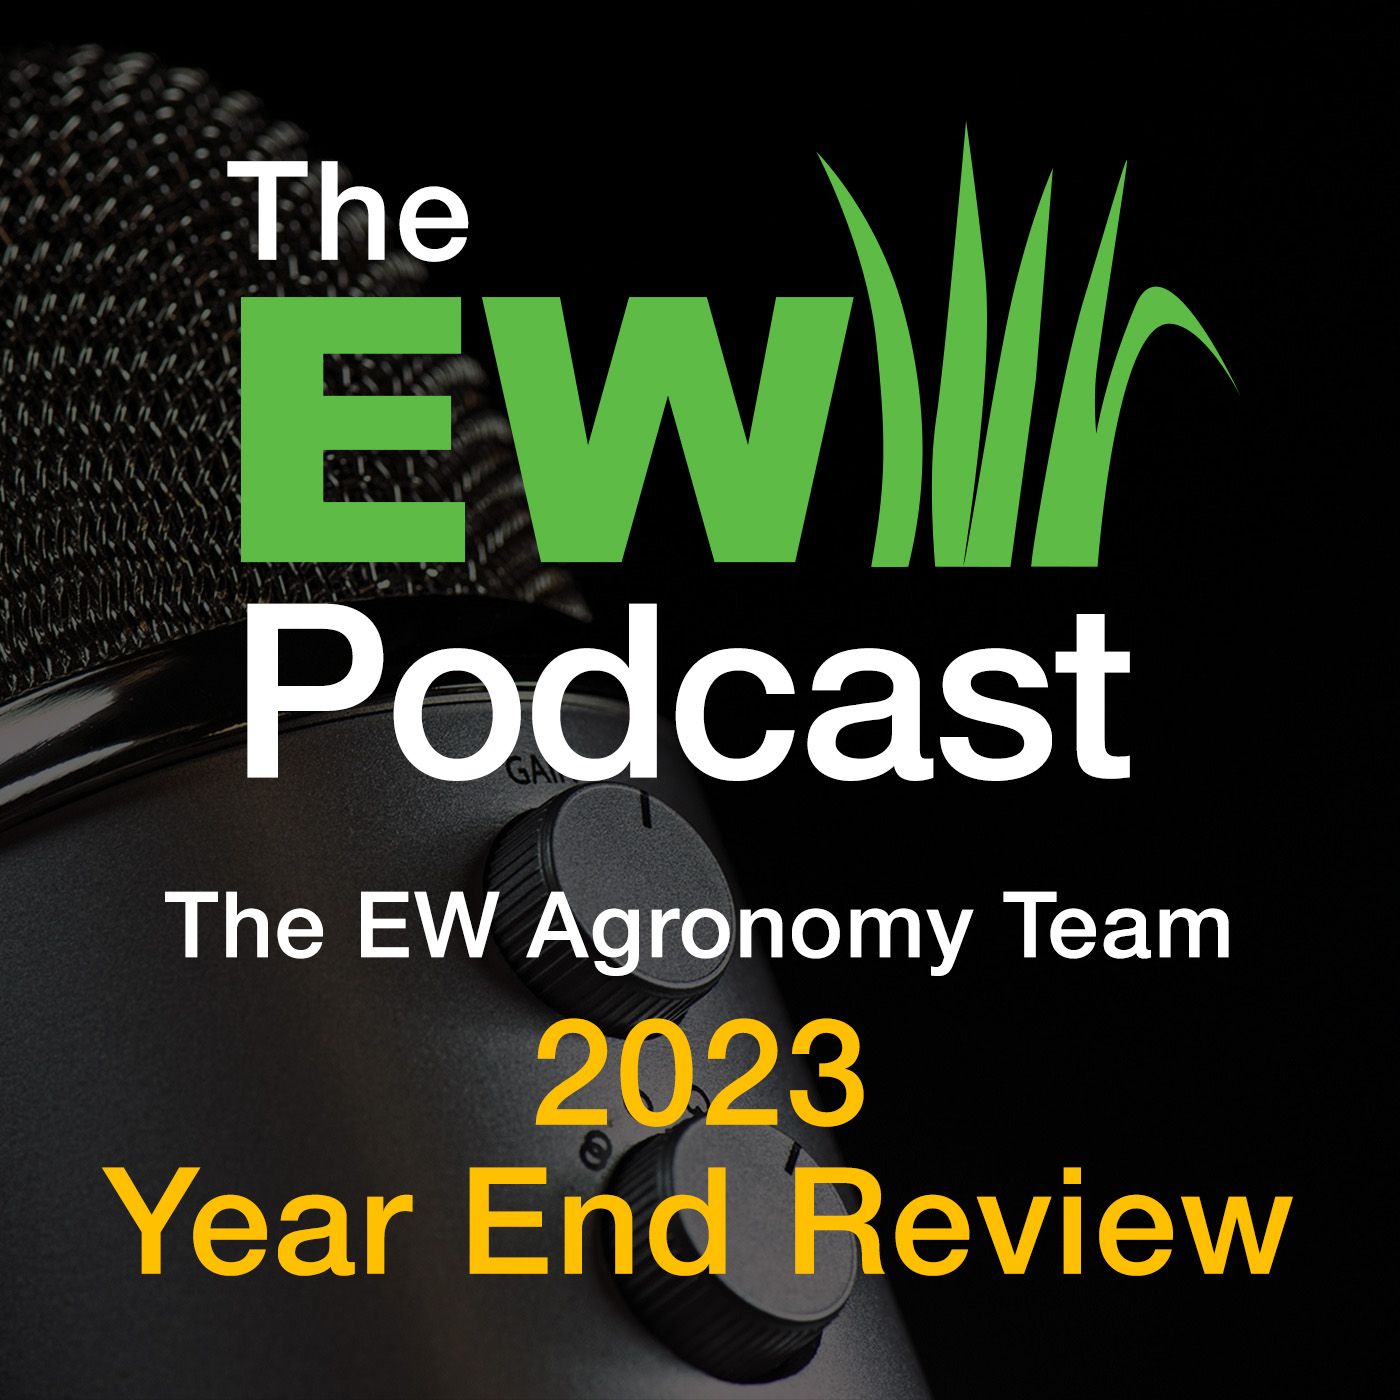 The EW Podcast - The Agronomy Team - Year End Review